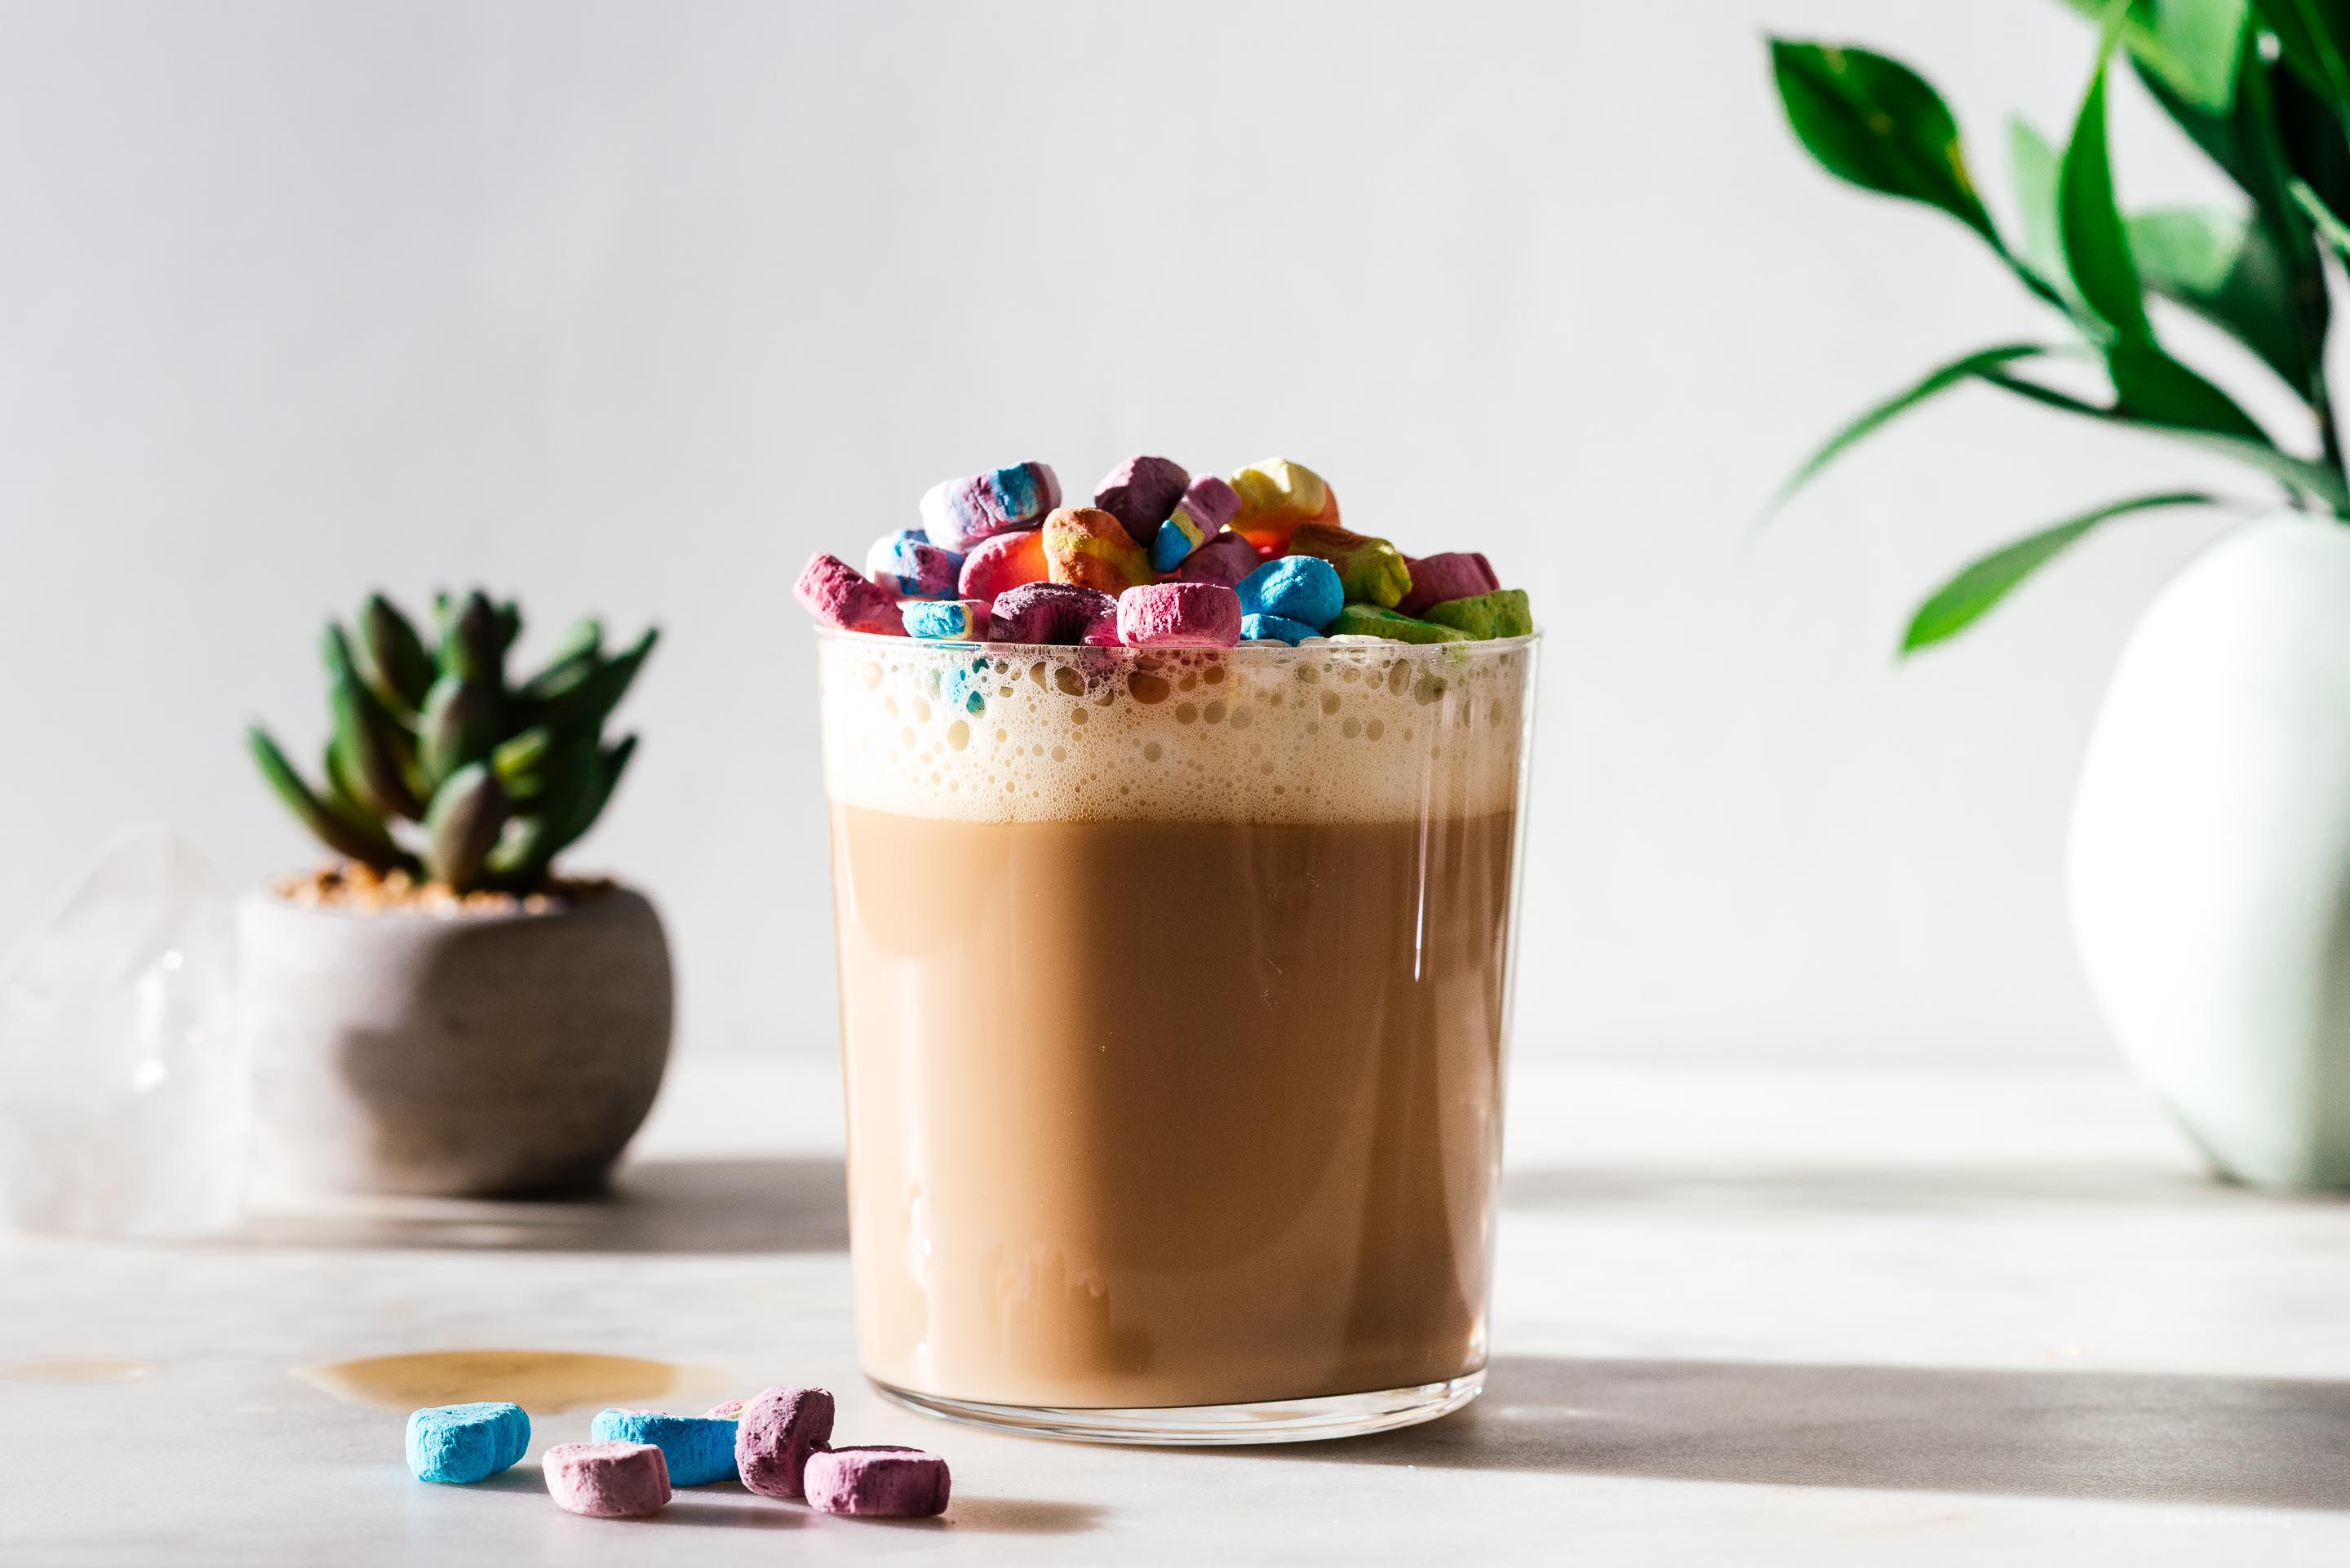 How to Make a Lucky Charms Cereal Milk Latte